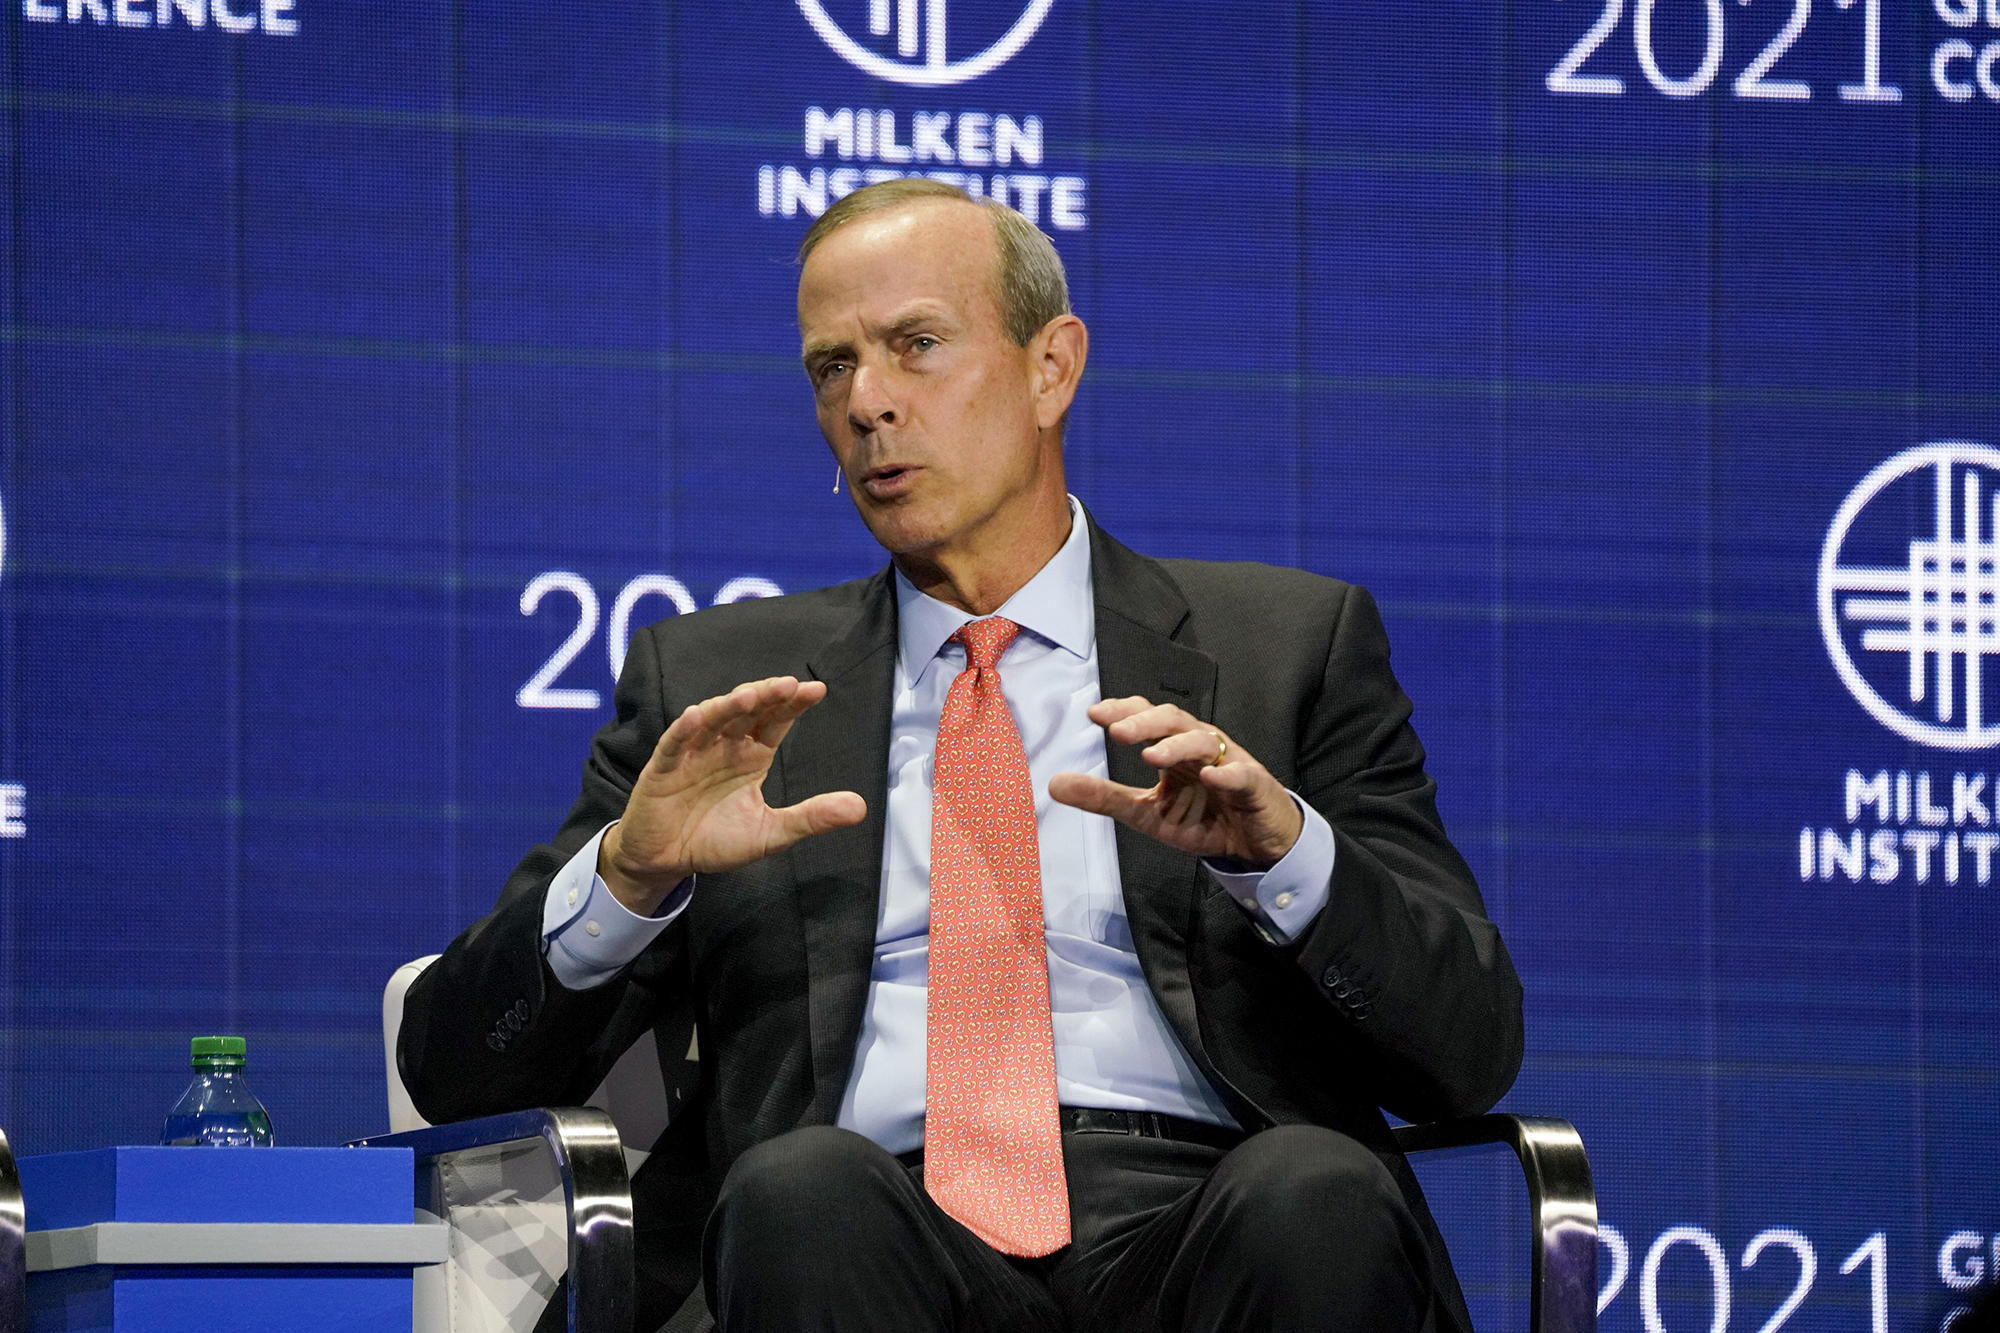 Mike Wirth, chief executive officer of Chevron Corp., attends a panel discussion during the Milken Institute Global Conference in Beverly Hills, California, U.S. on October 18.